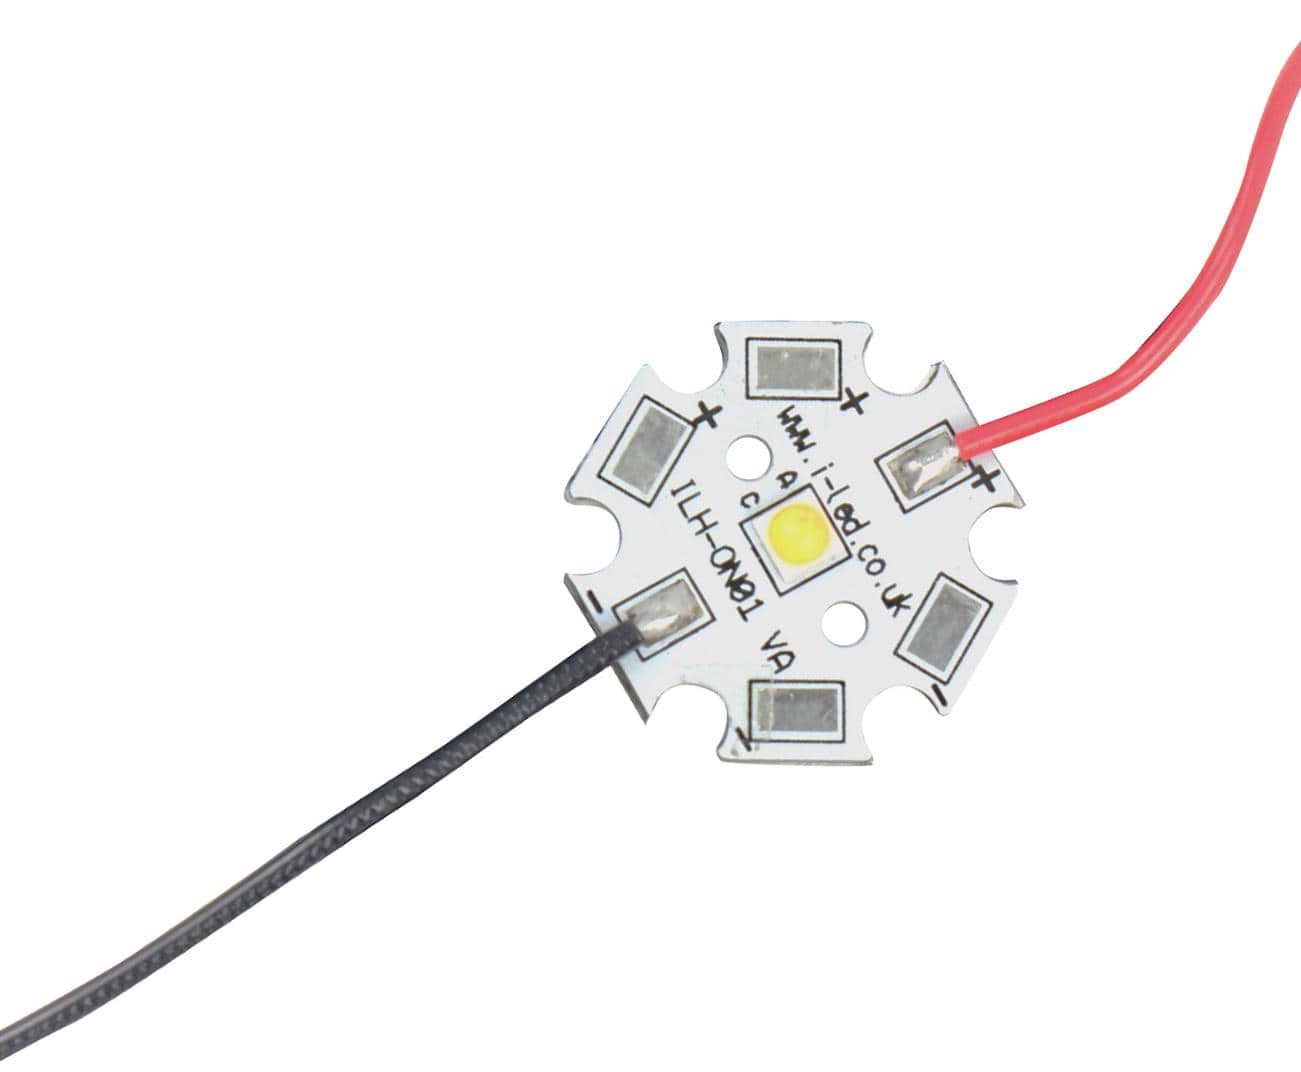 INTELLIGENT LED SOLUTIONS LED Modules, White ILH-PO01-NW80-SC221-WIR200. LED MODULE, NEUTRAL WHT, 4000K, 135LM INTELLIGENT LED SOLUTIONS 3583106 ILH-PO01-NW80-SC221-WIR200.